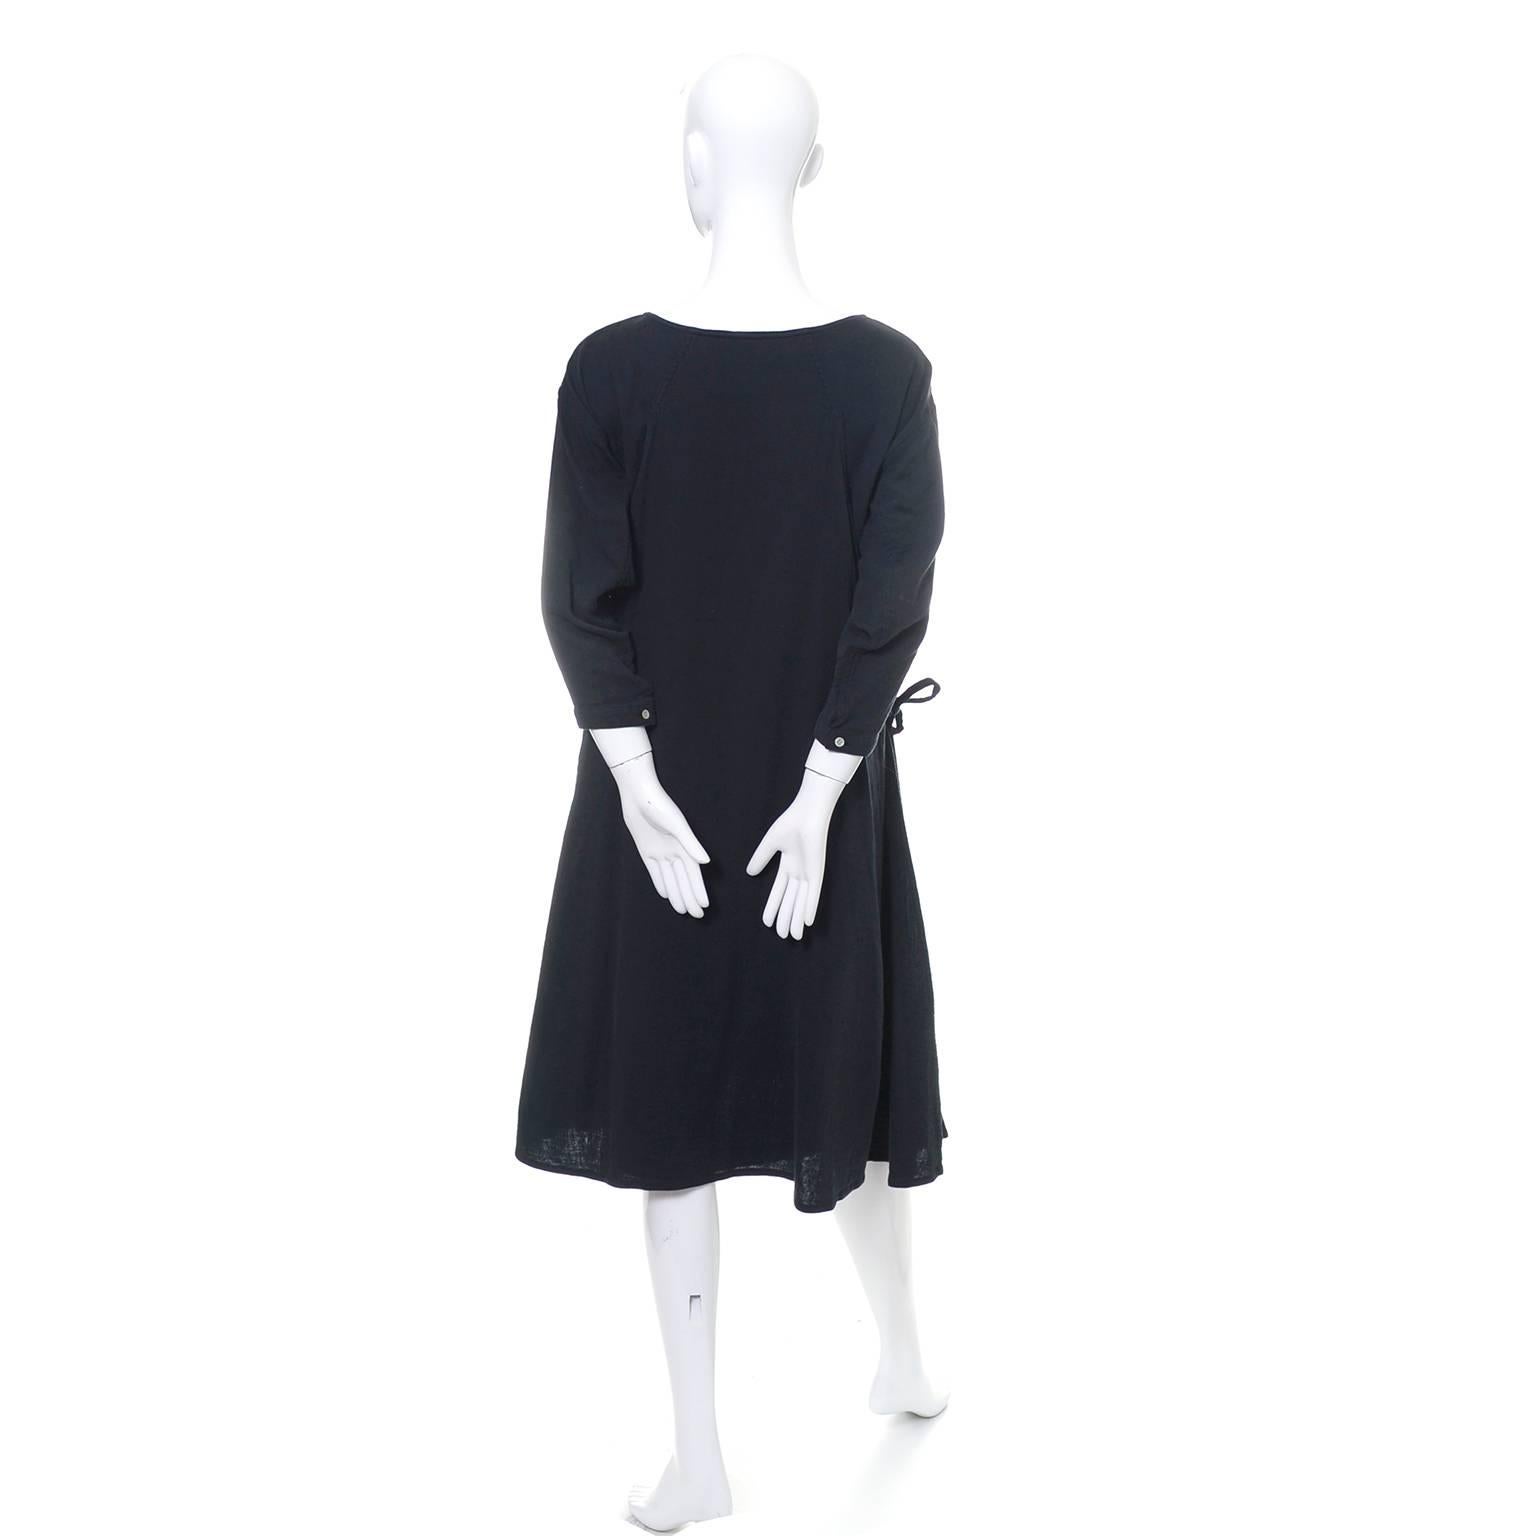 Issey Miyake Sport 1980s Cotton Dress or Tunic Made in Japan Minimalist Chic 1